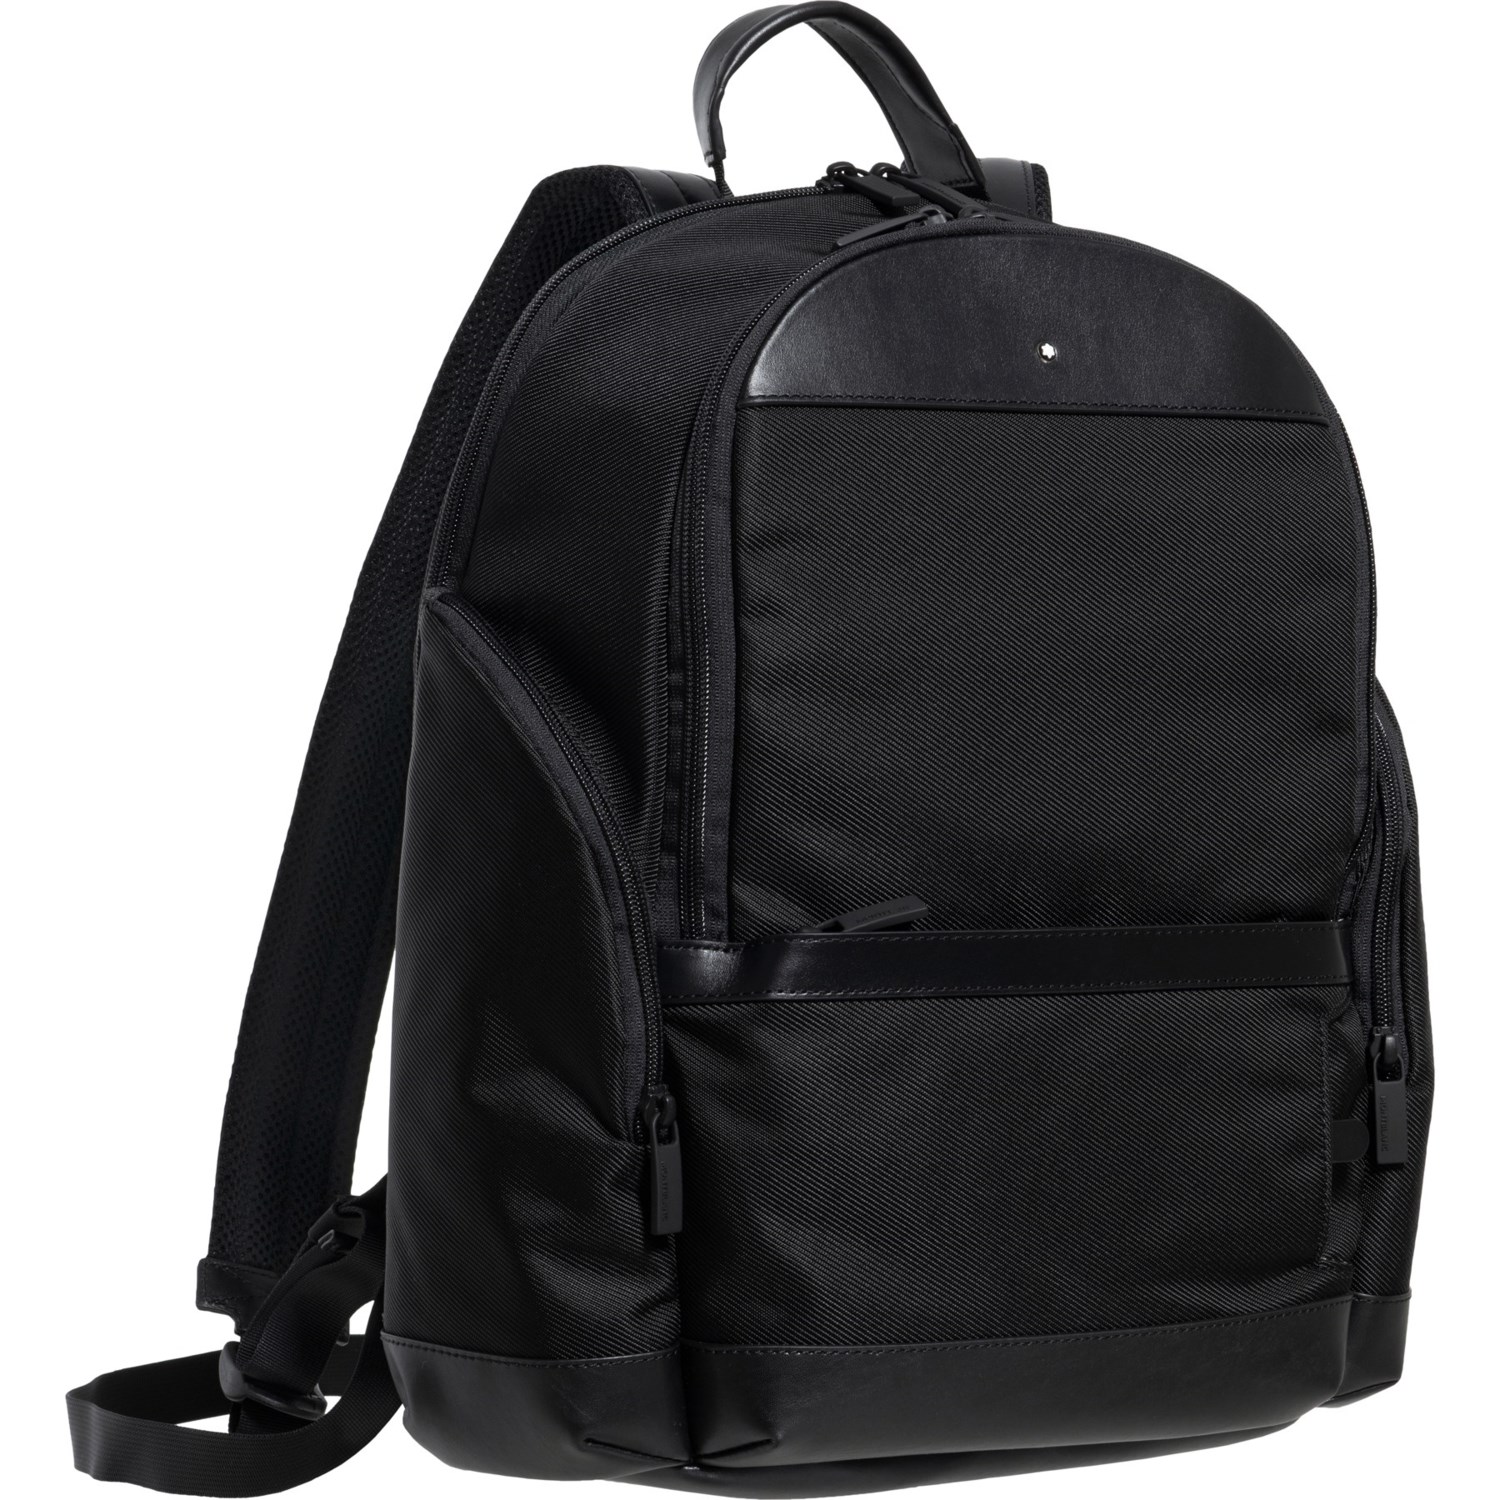 MONTBLANC Made in Italy My Nightflight Backpack - Leather - Save 48%